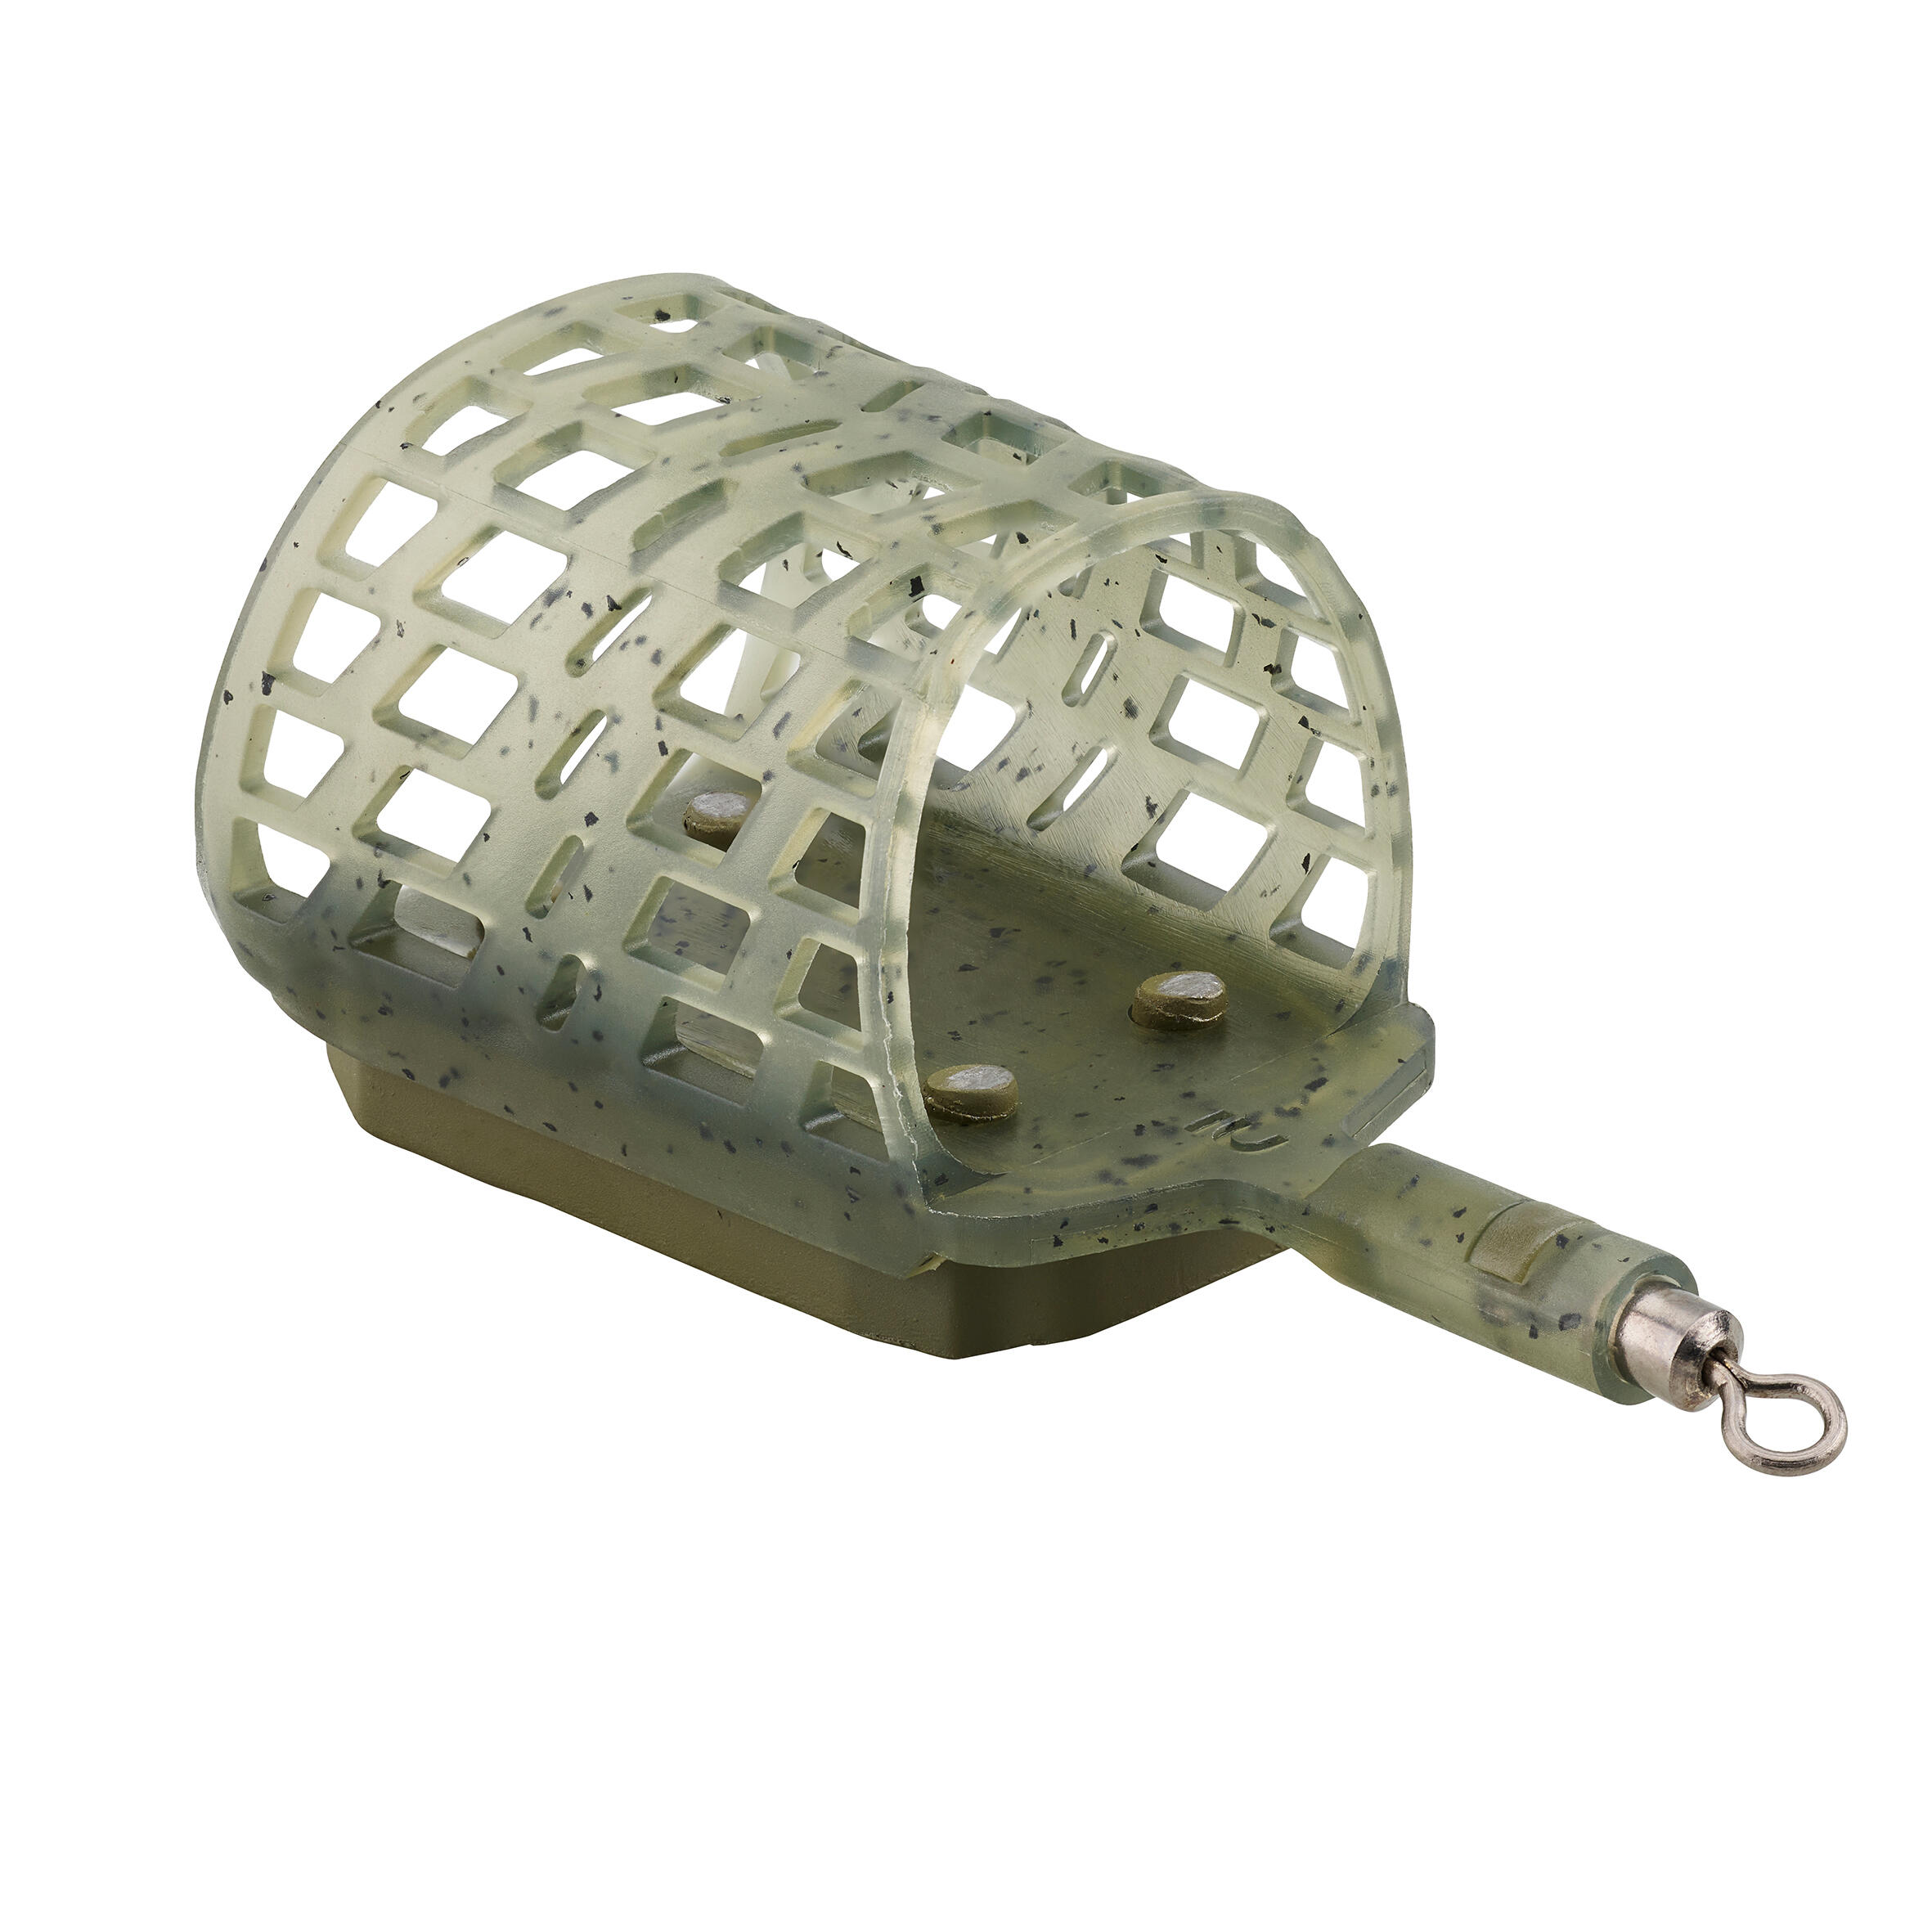 Small open feeder cage for feeder fishing, FEEDER - SO - S. 8/9